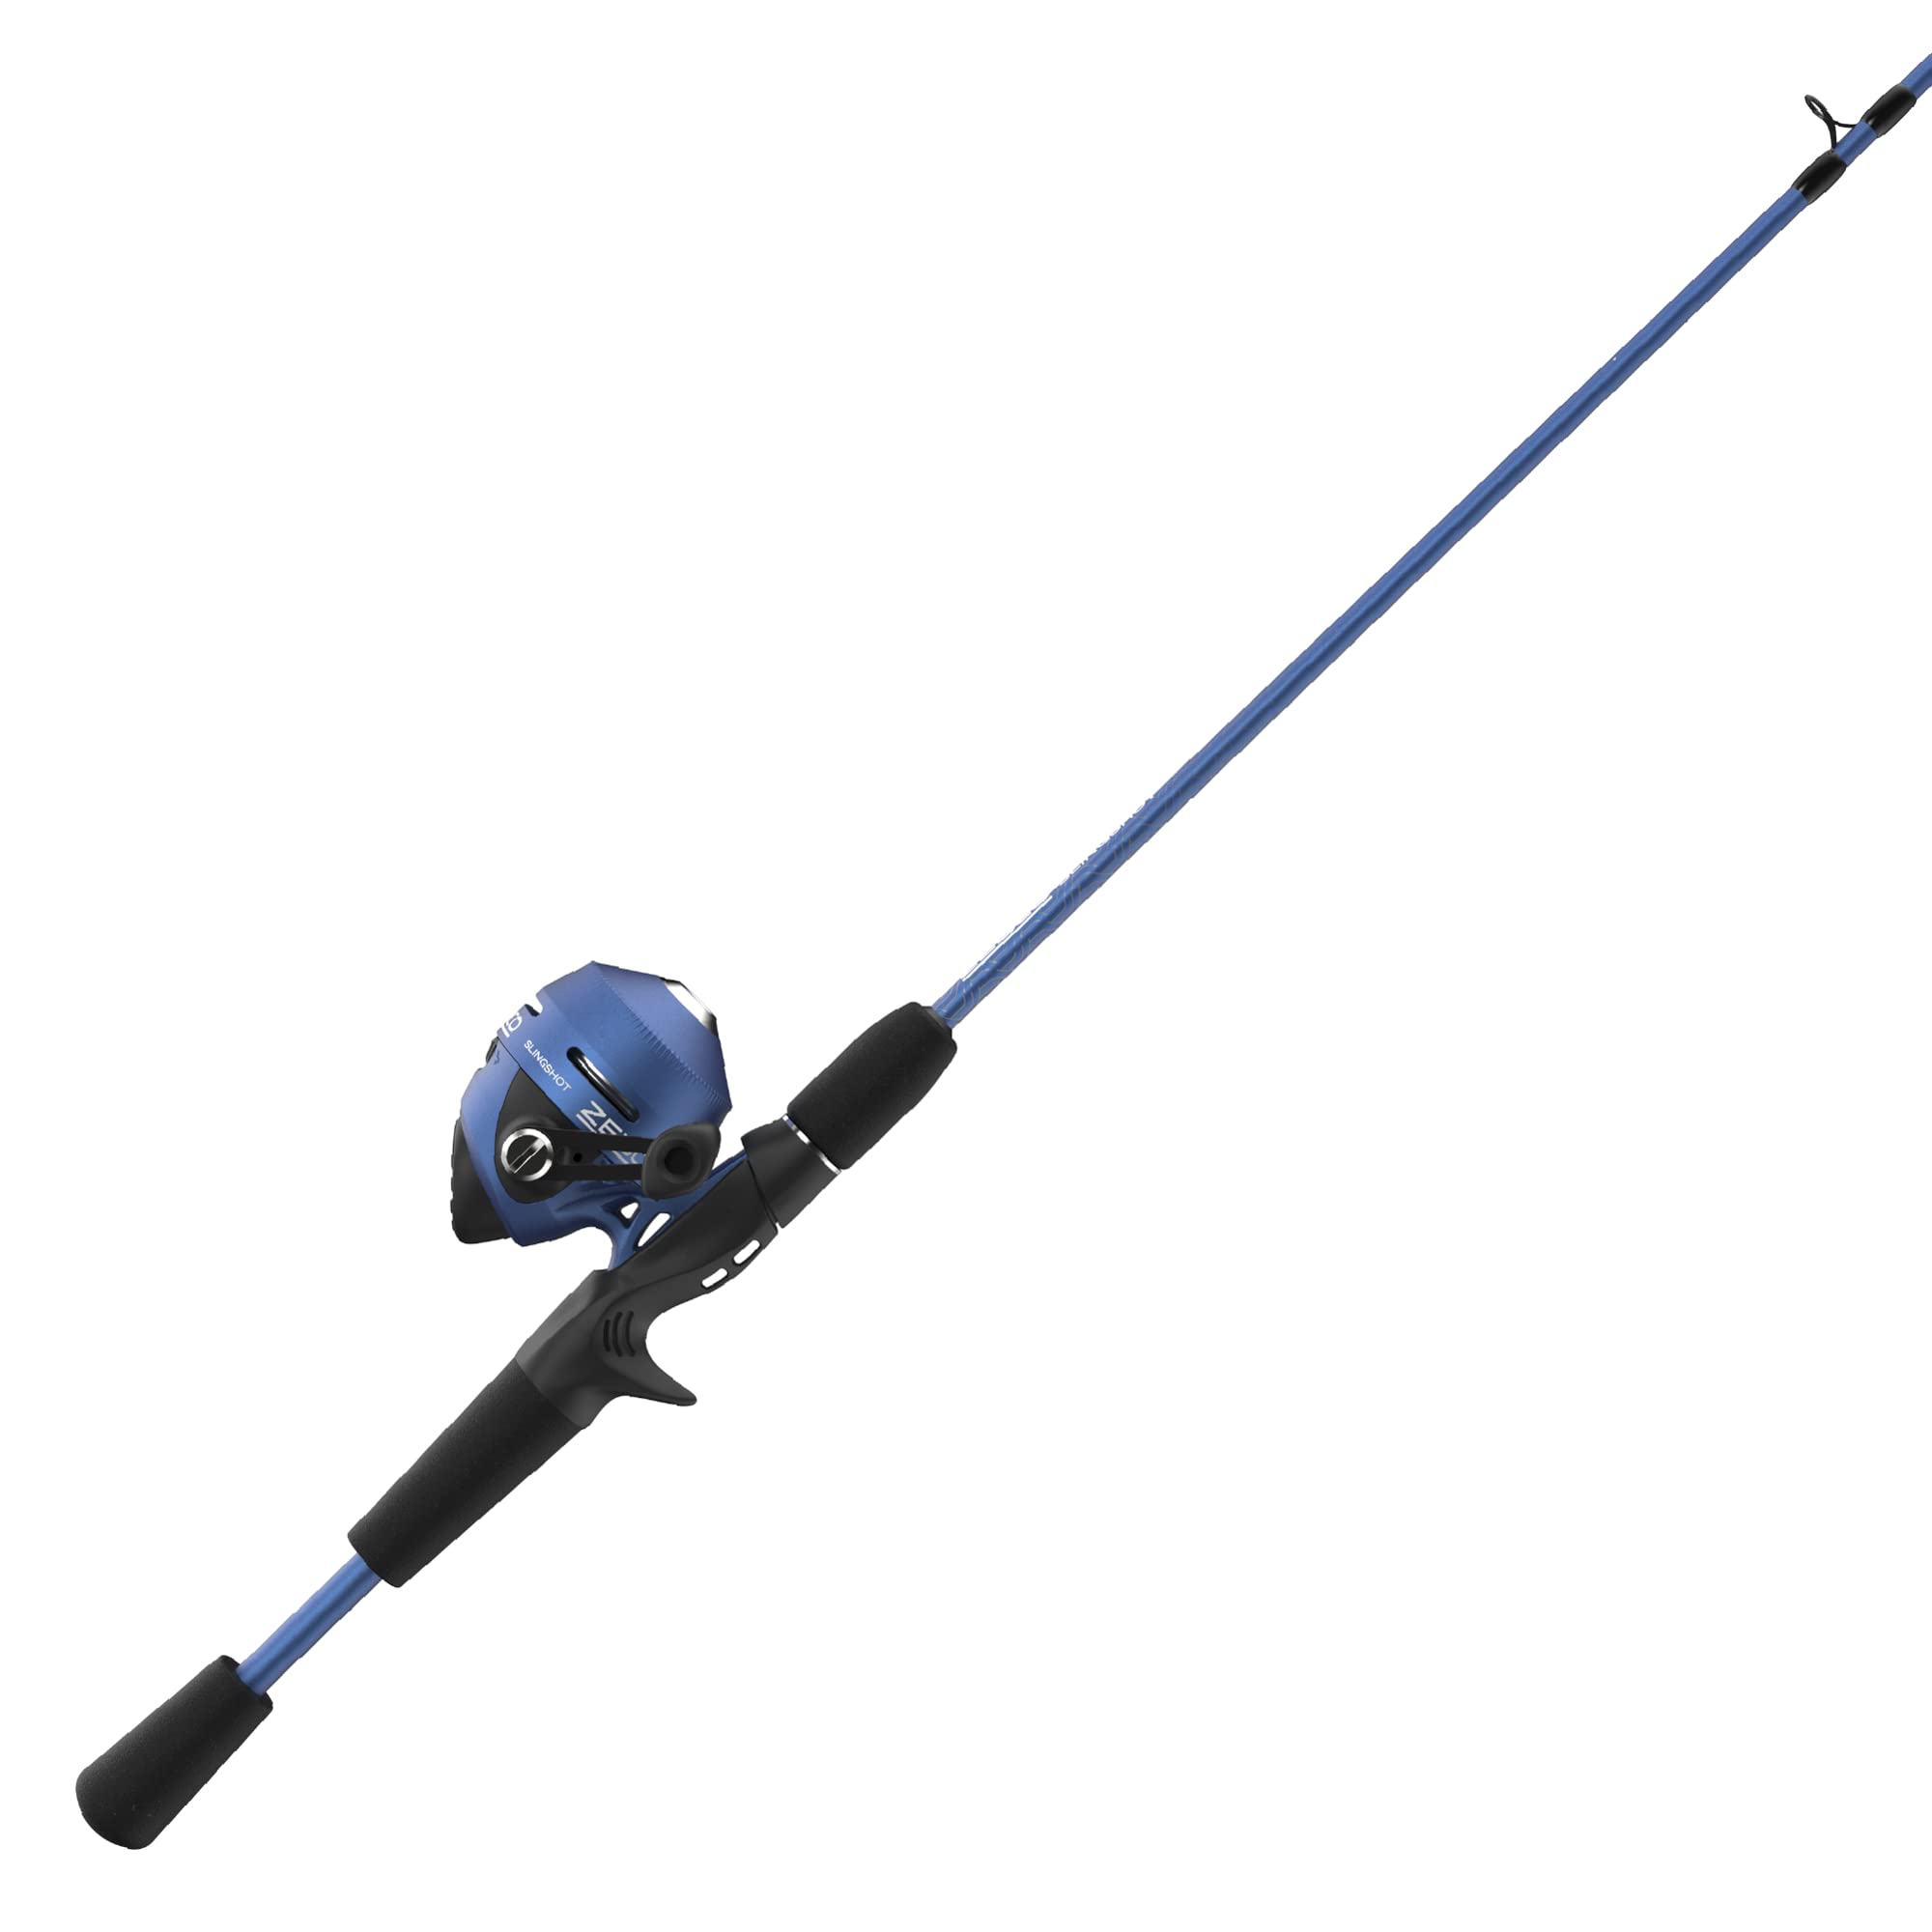 I have this five piece zebco rod and reel, I want to put new line